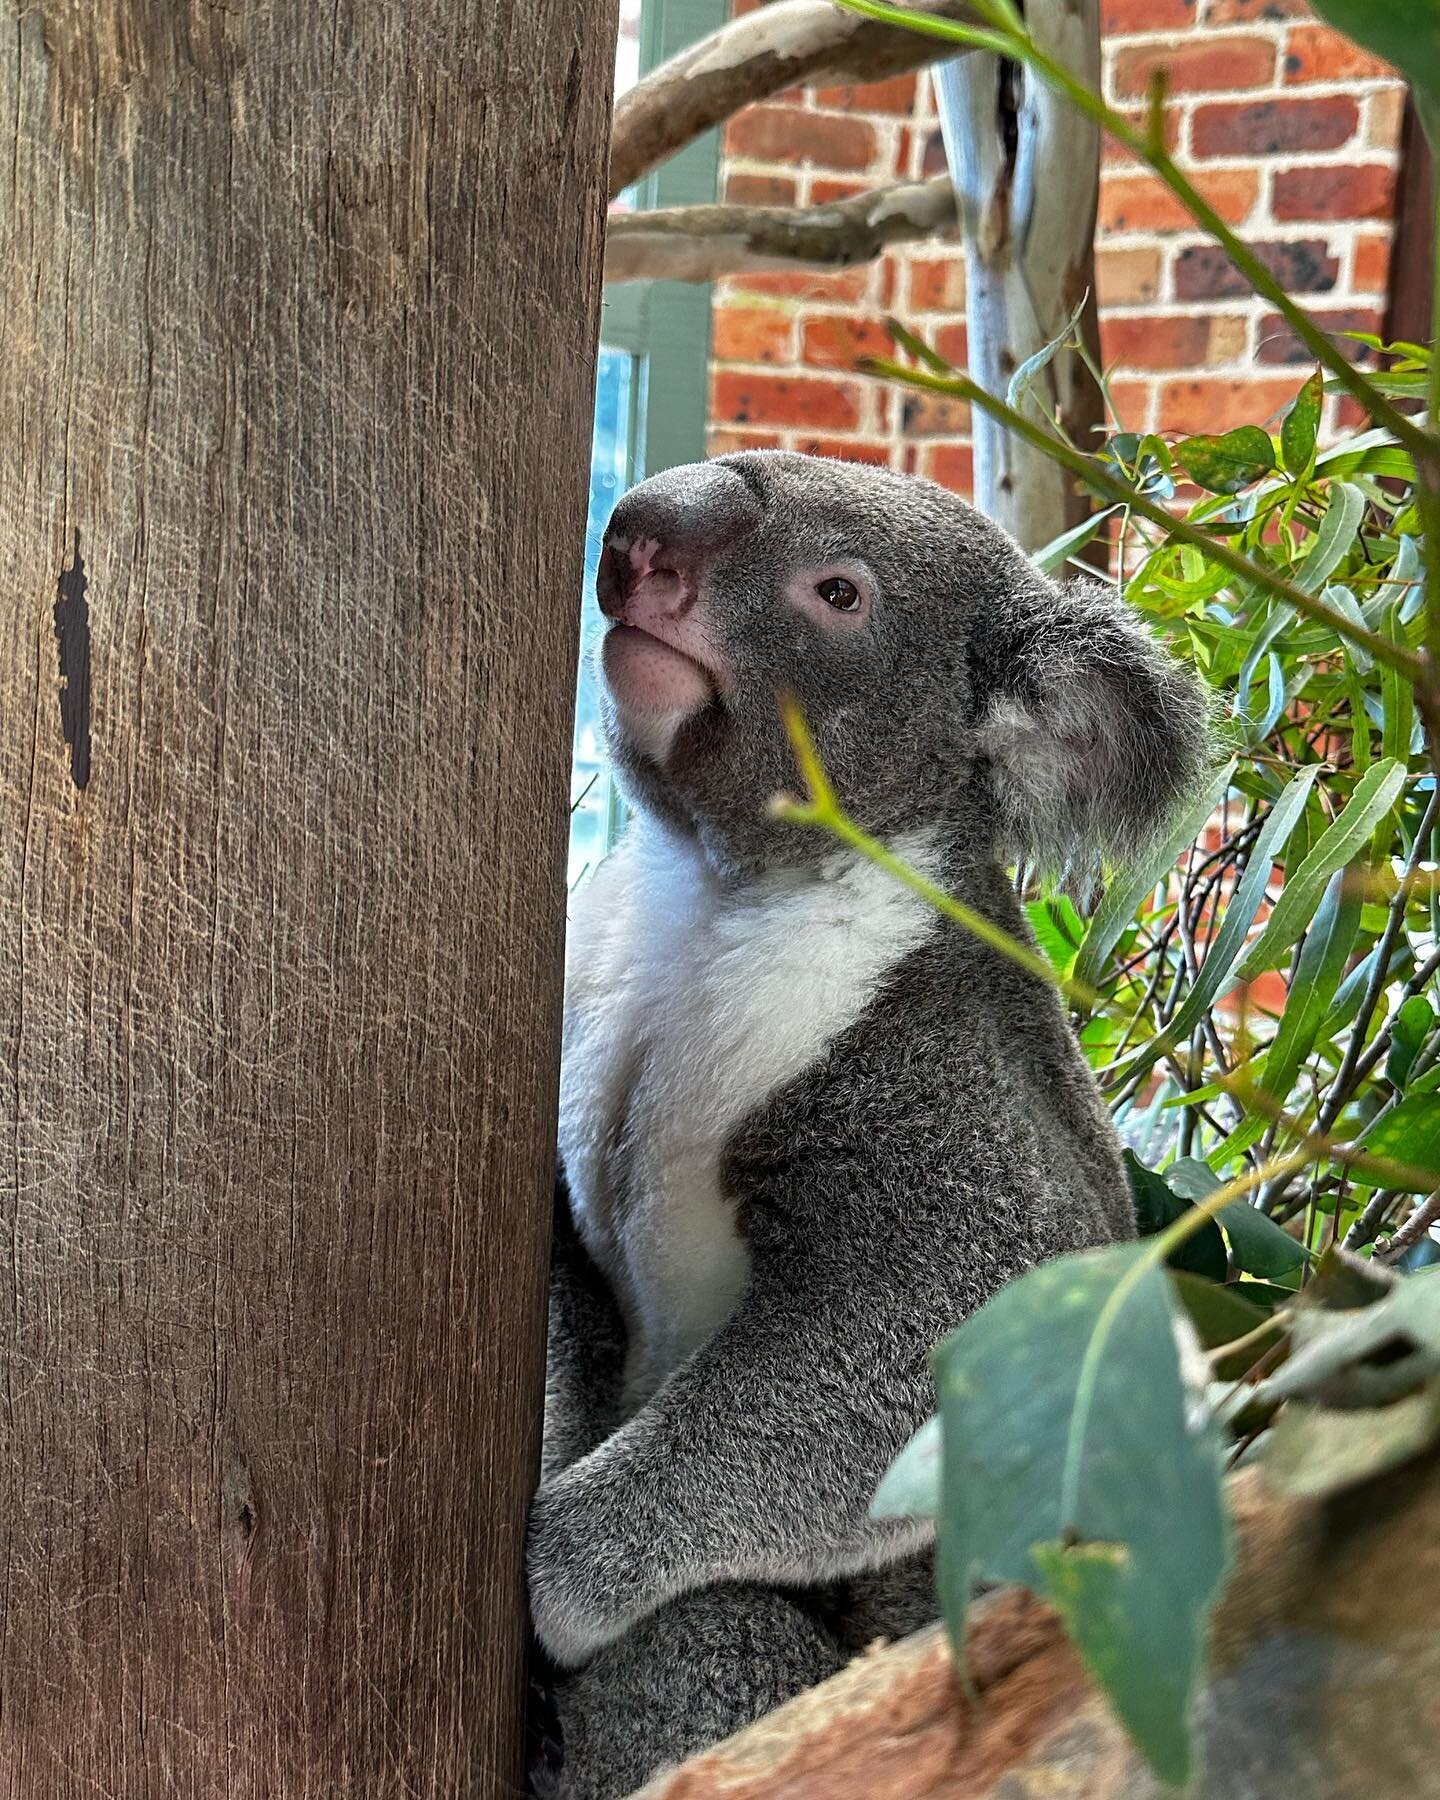 Koala!! We did a Blue Mountains tour yesterday (Sunday here in Australia) and our first stop was Calmsley Hill City Farm. They have all kinds of animals, but of course we were most interested in the koalas, kangaroos, and wallabys. We even got to pet